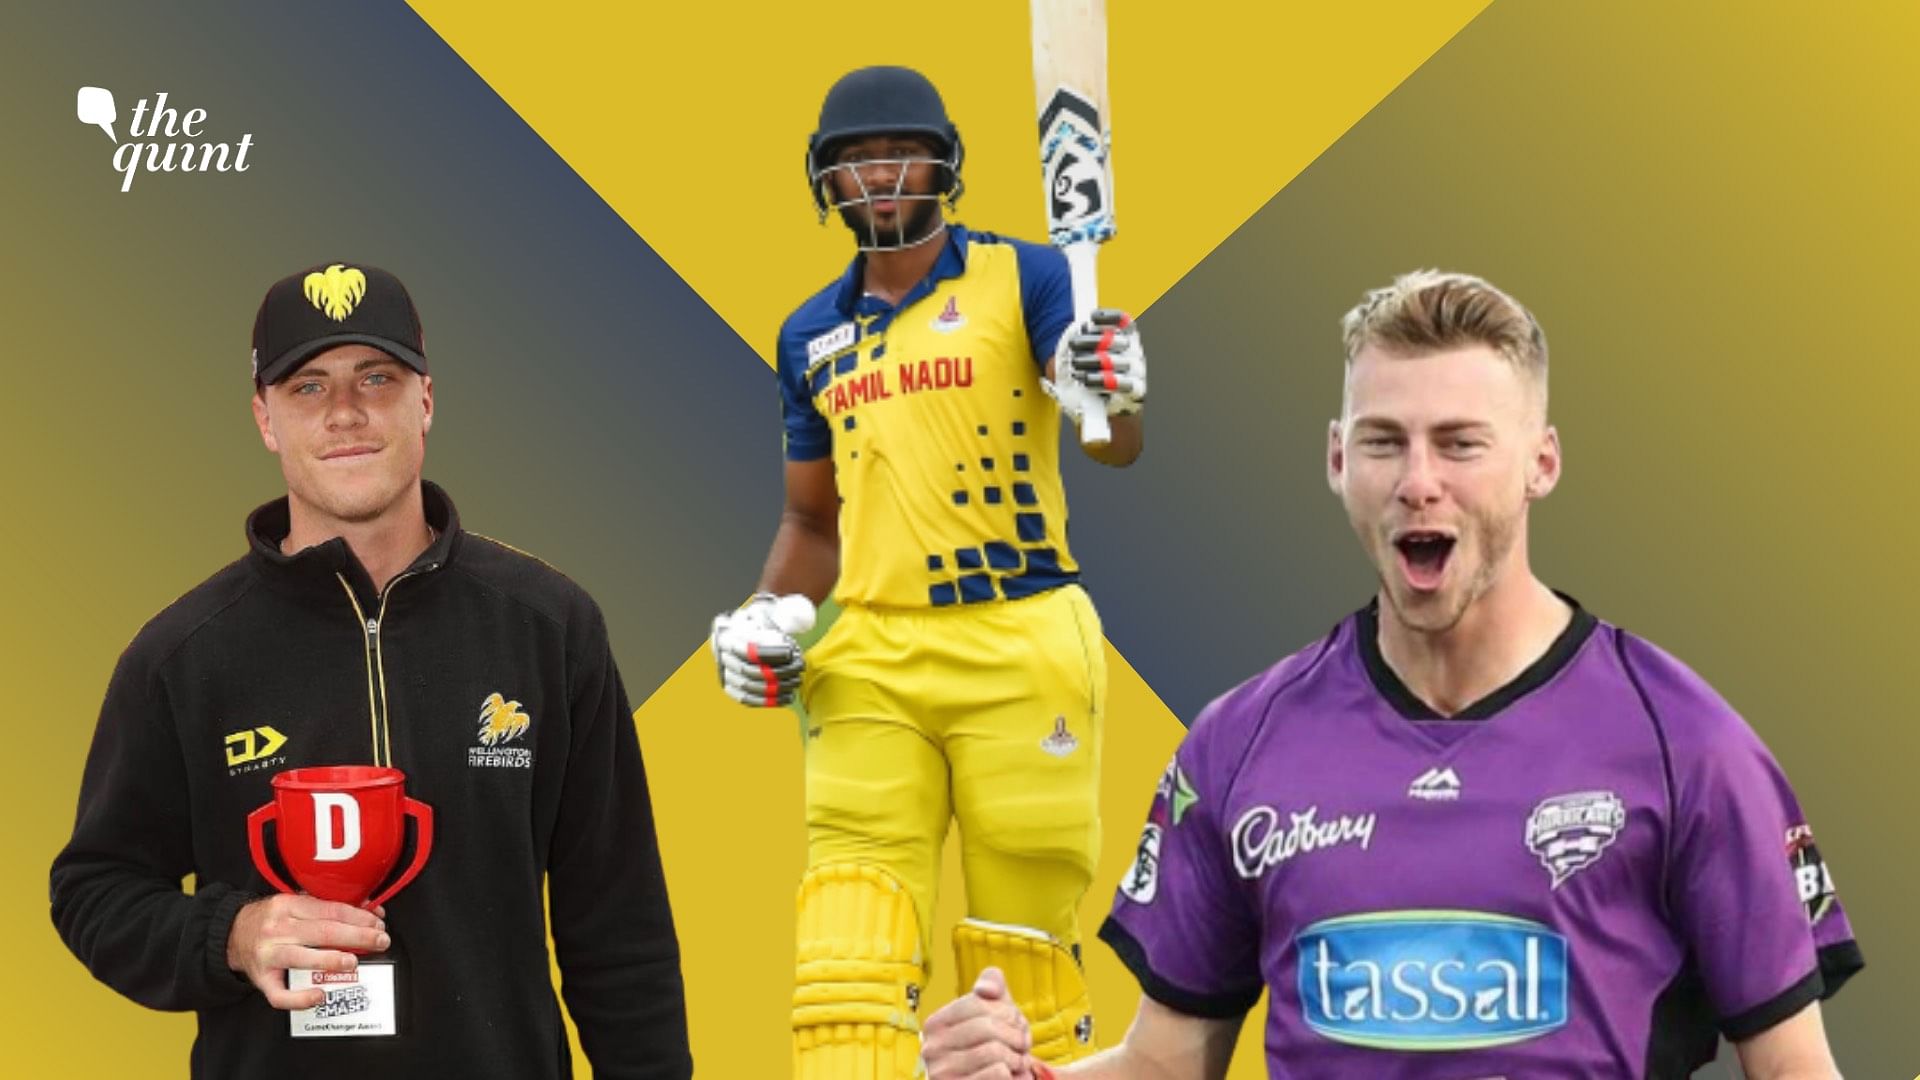 As IPL 2021 is set to start, here’s a look at some of the young players who could make a mark this season.